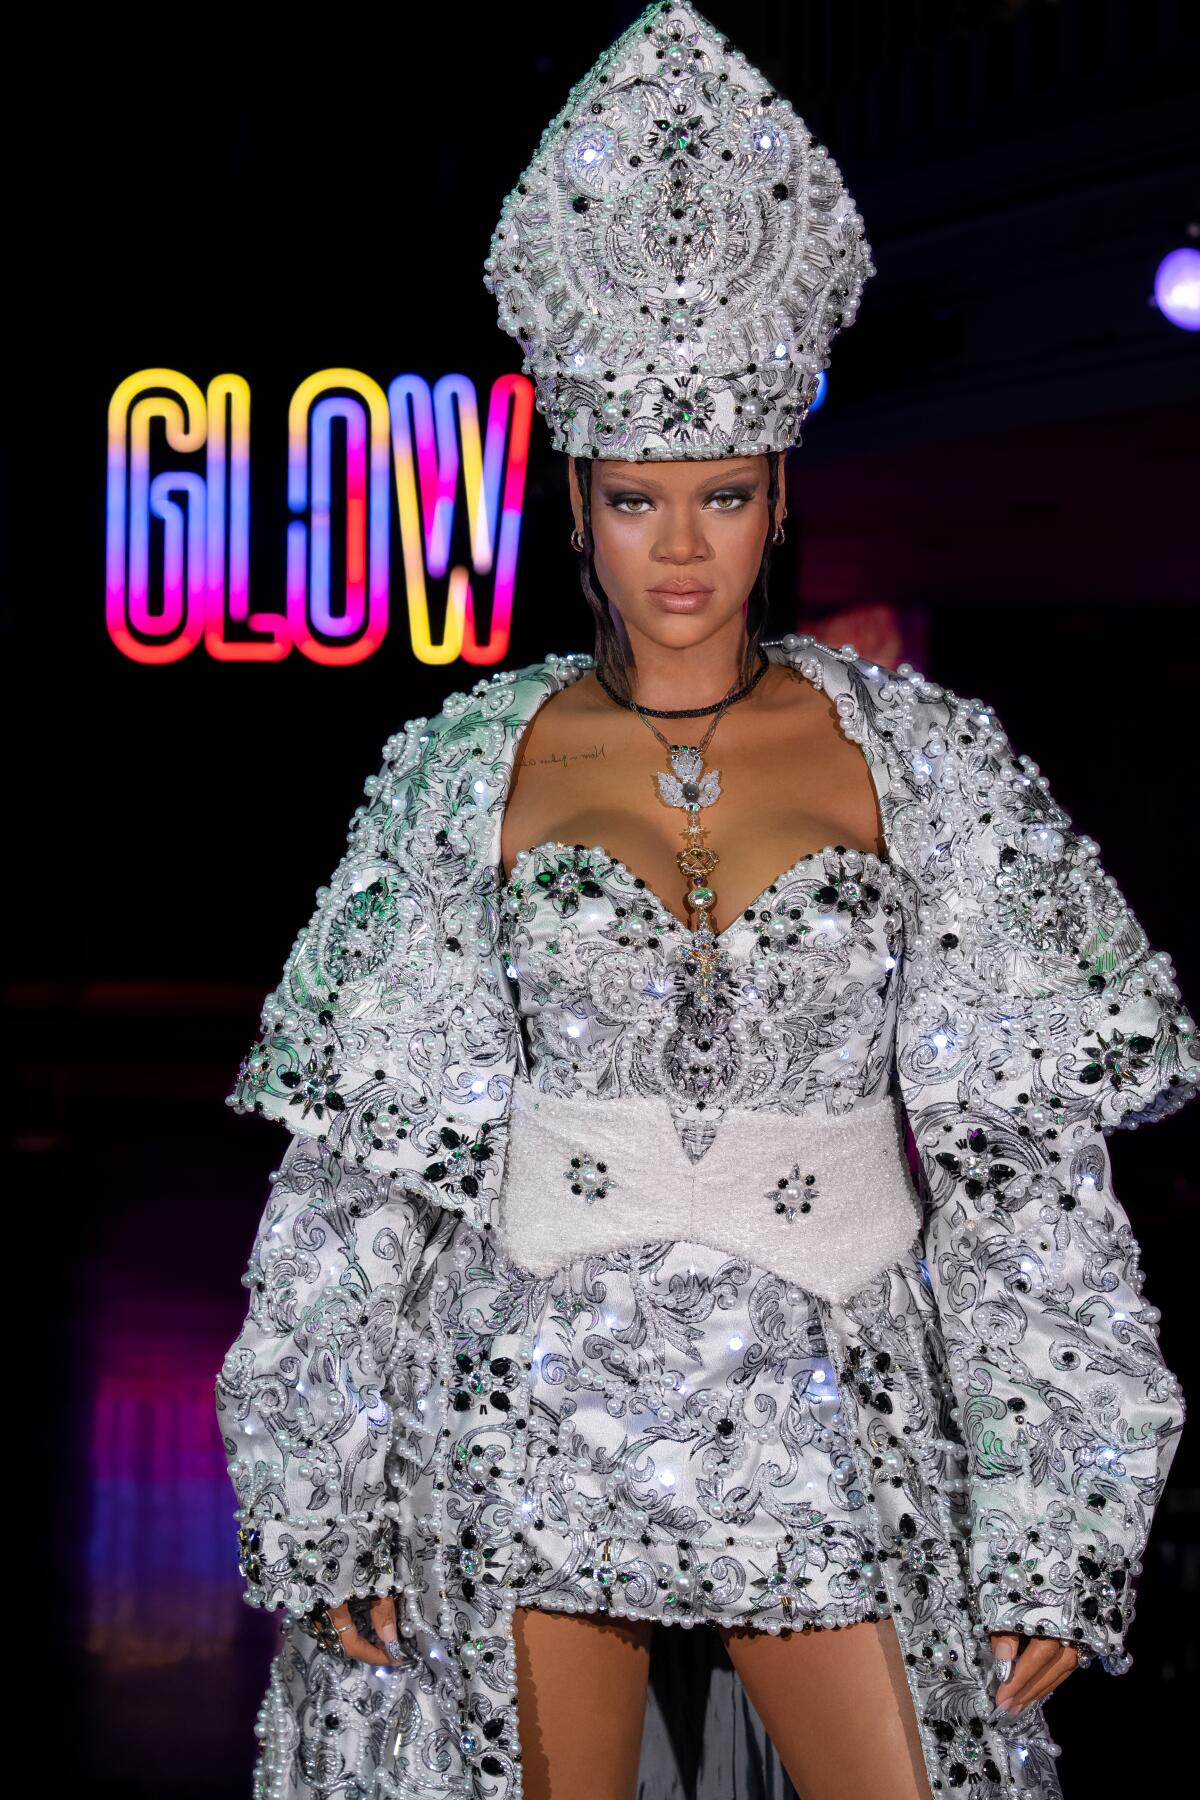 How Rihanna made a style statement at the Super Bowl - Offaly Live